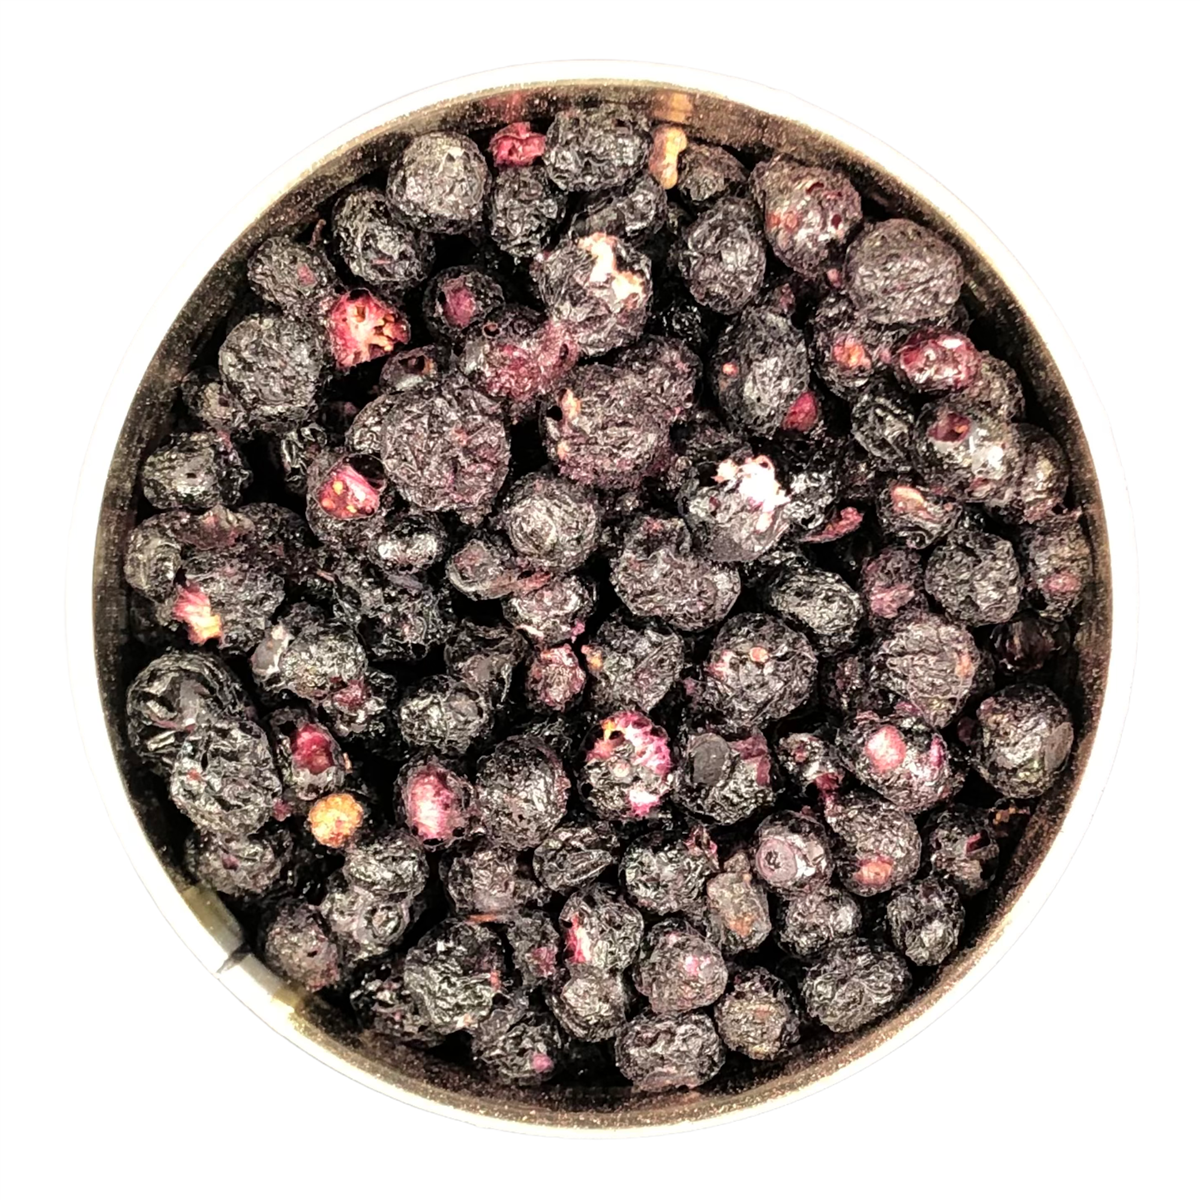 Future Essentials Freeze Dried Whole Blueberries